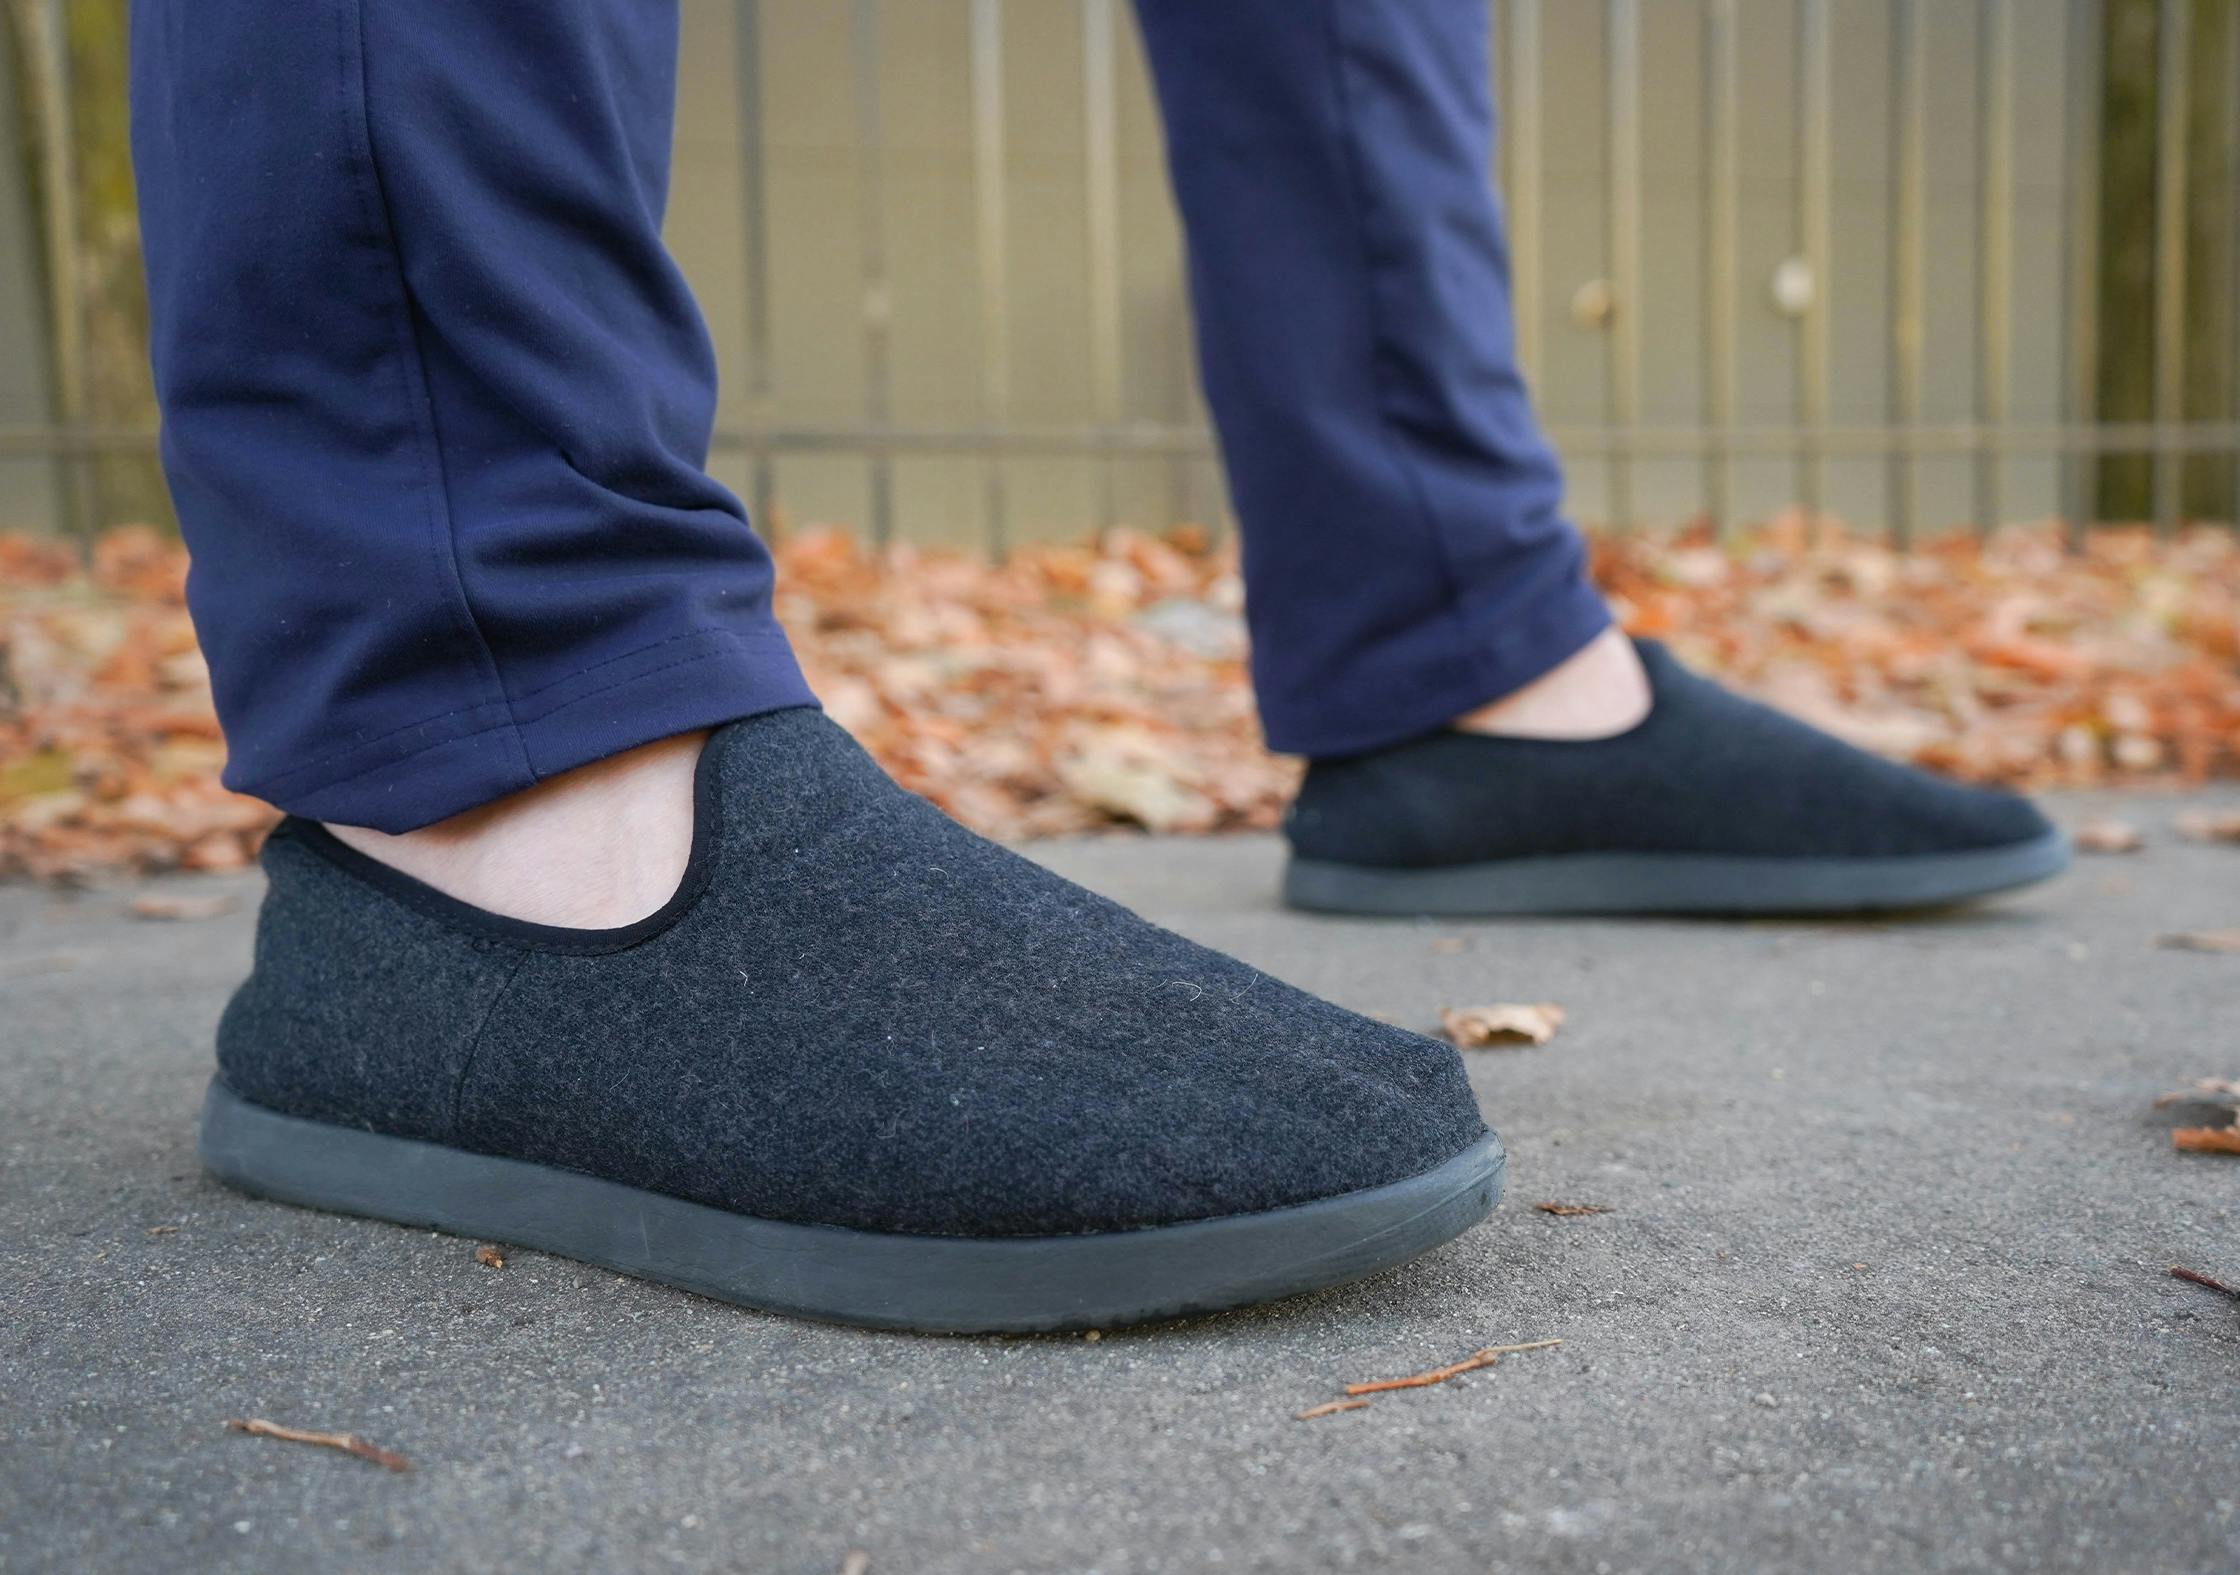 Allbirds Wool Loungers Review (Soft & Cozy) | Pack Hacker